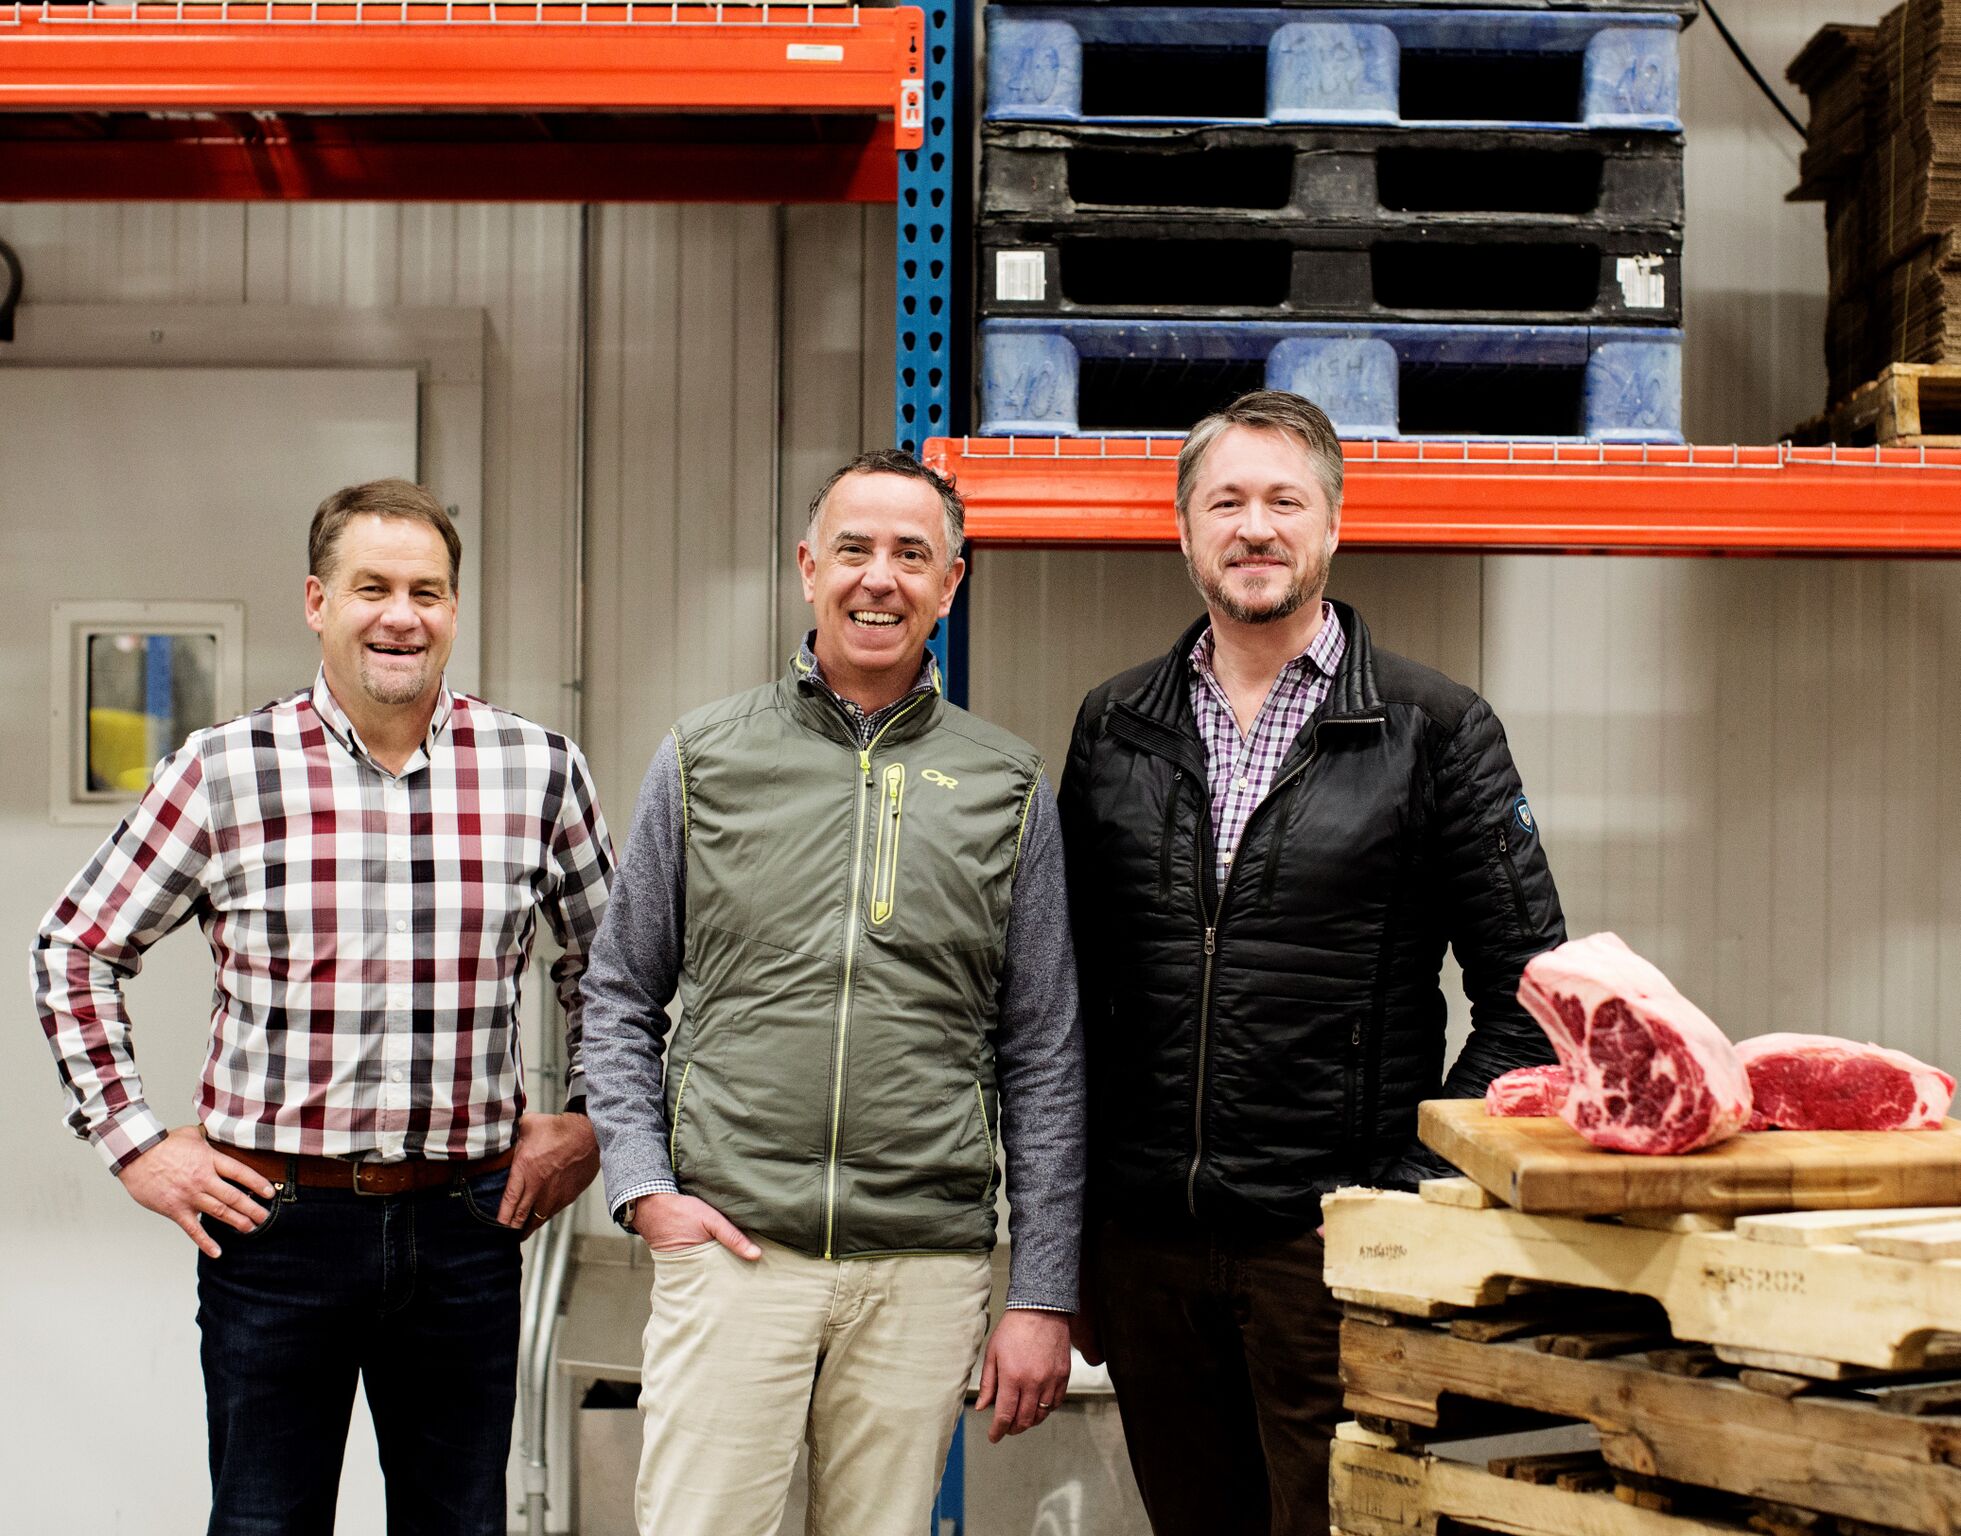 The Fish Guys Expand into Beef, Pork and Chicken with Launch of Market House Meats